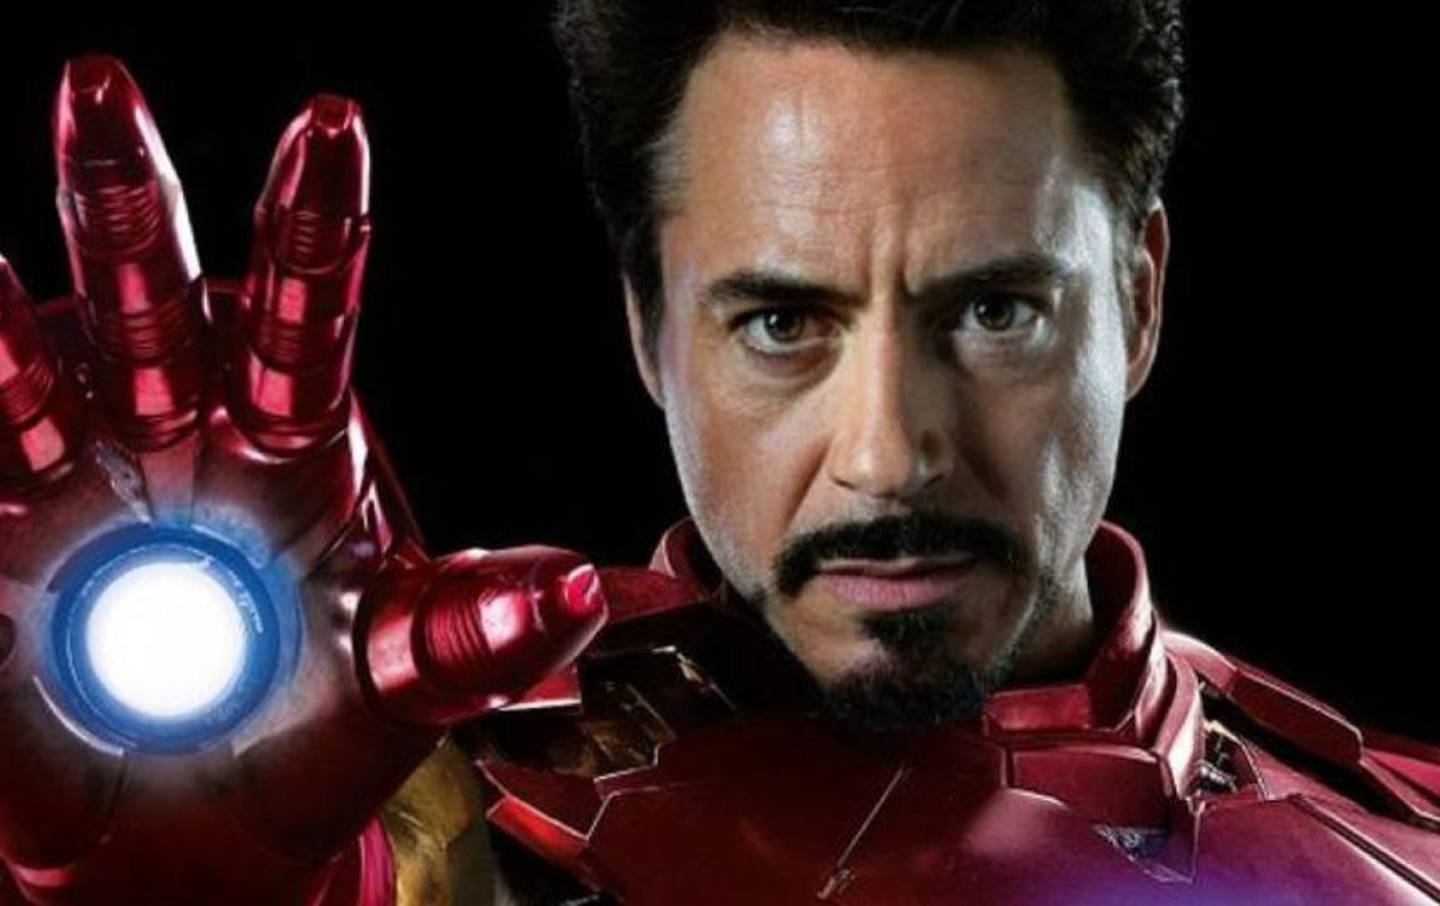 Marvel: Rumors ensure that Robert Downey Jr. could return as a villain and with the role of Iron Man to the MCU